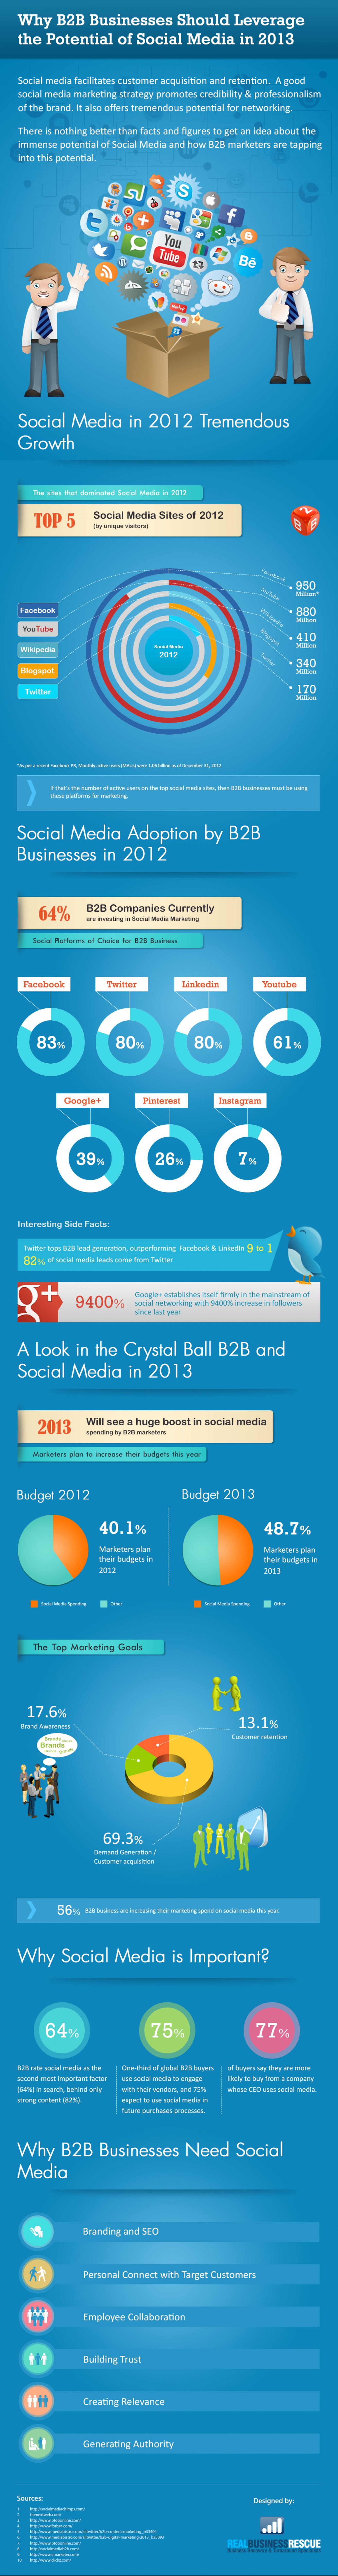 Why B2B Businesses Should Leverage the Potential of Social Media in 2013